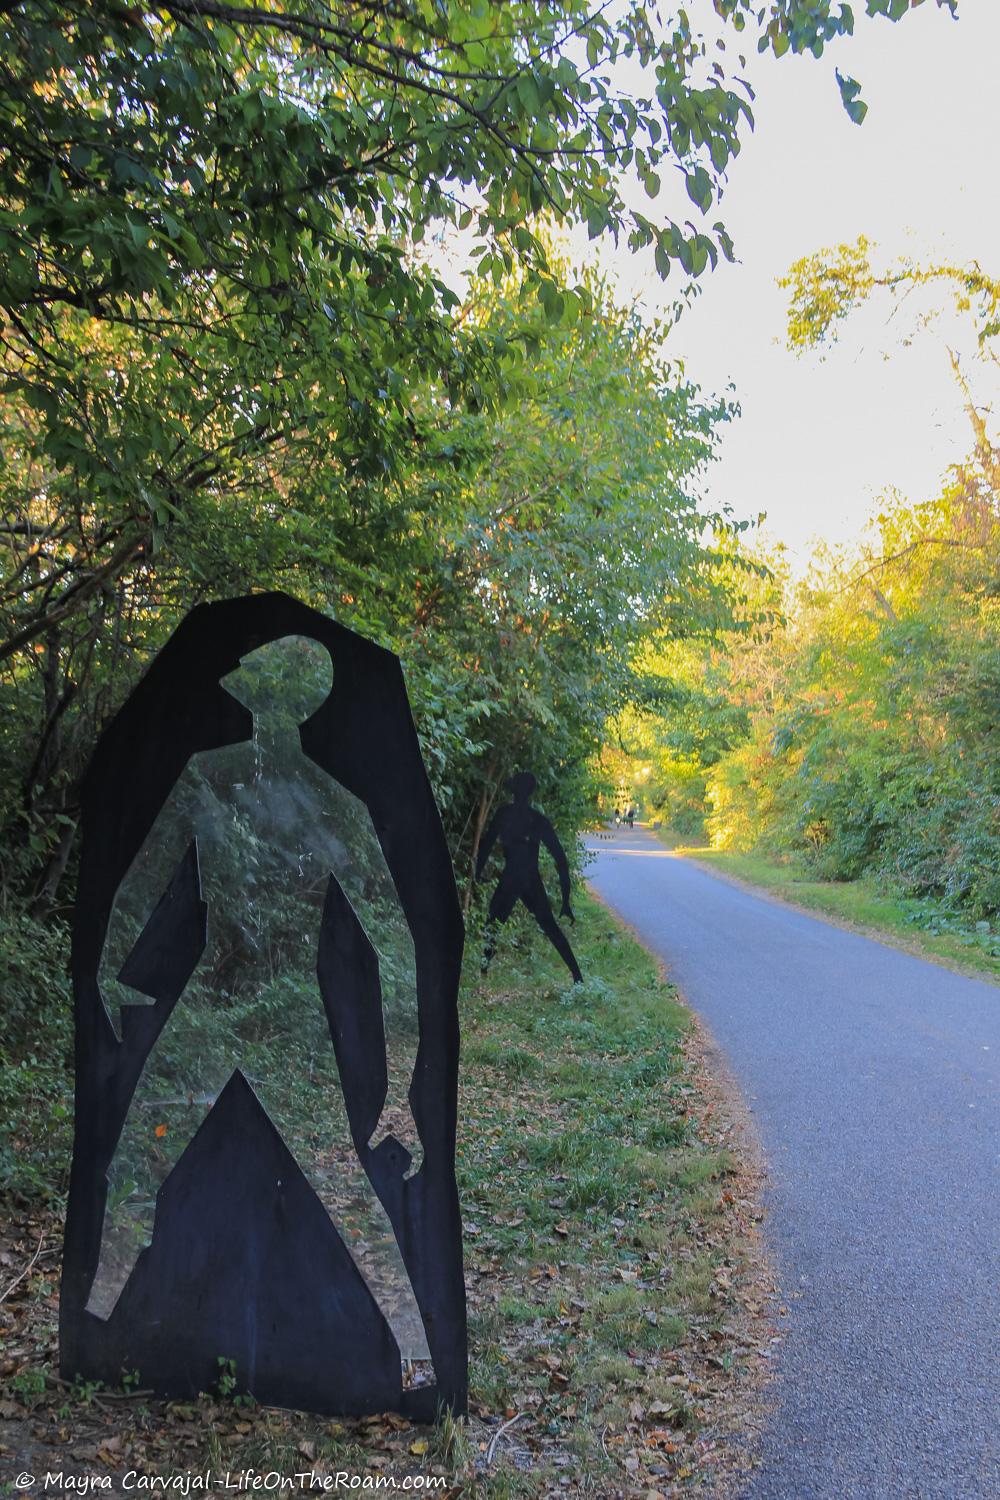 Outdoor art along a paved trail